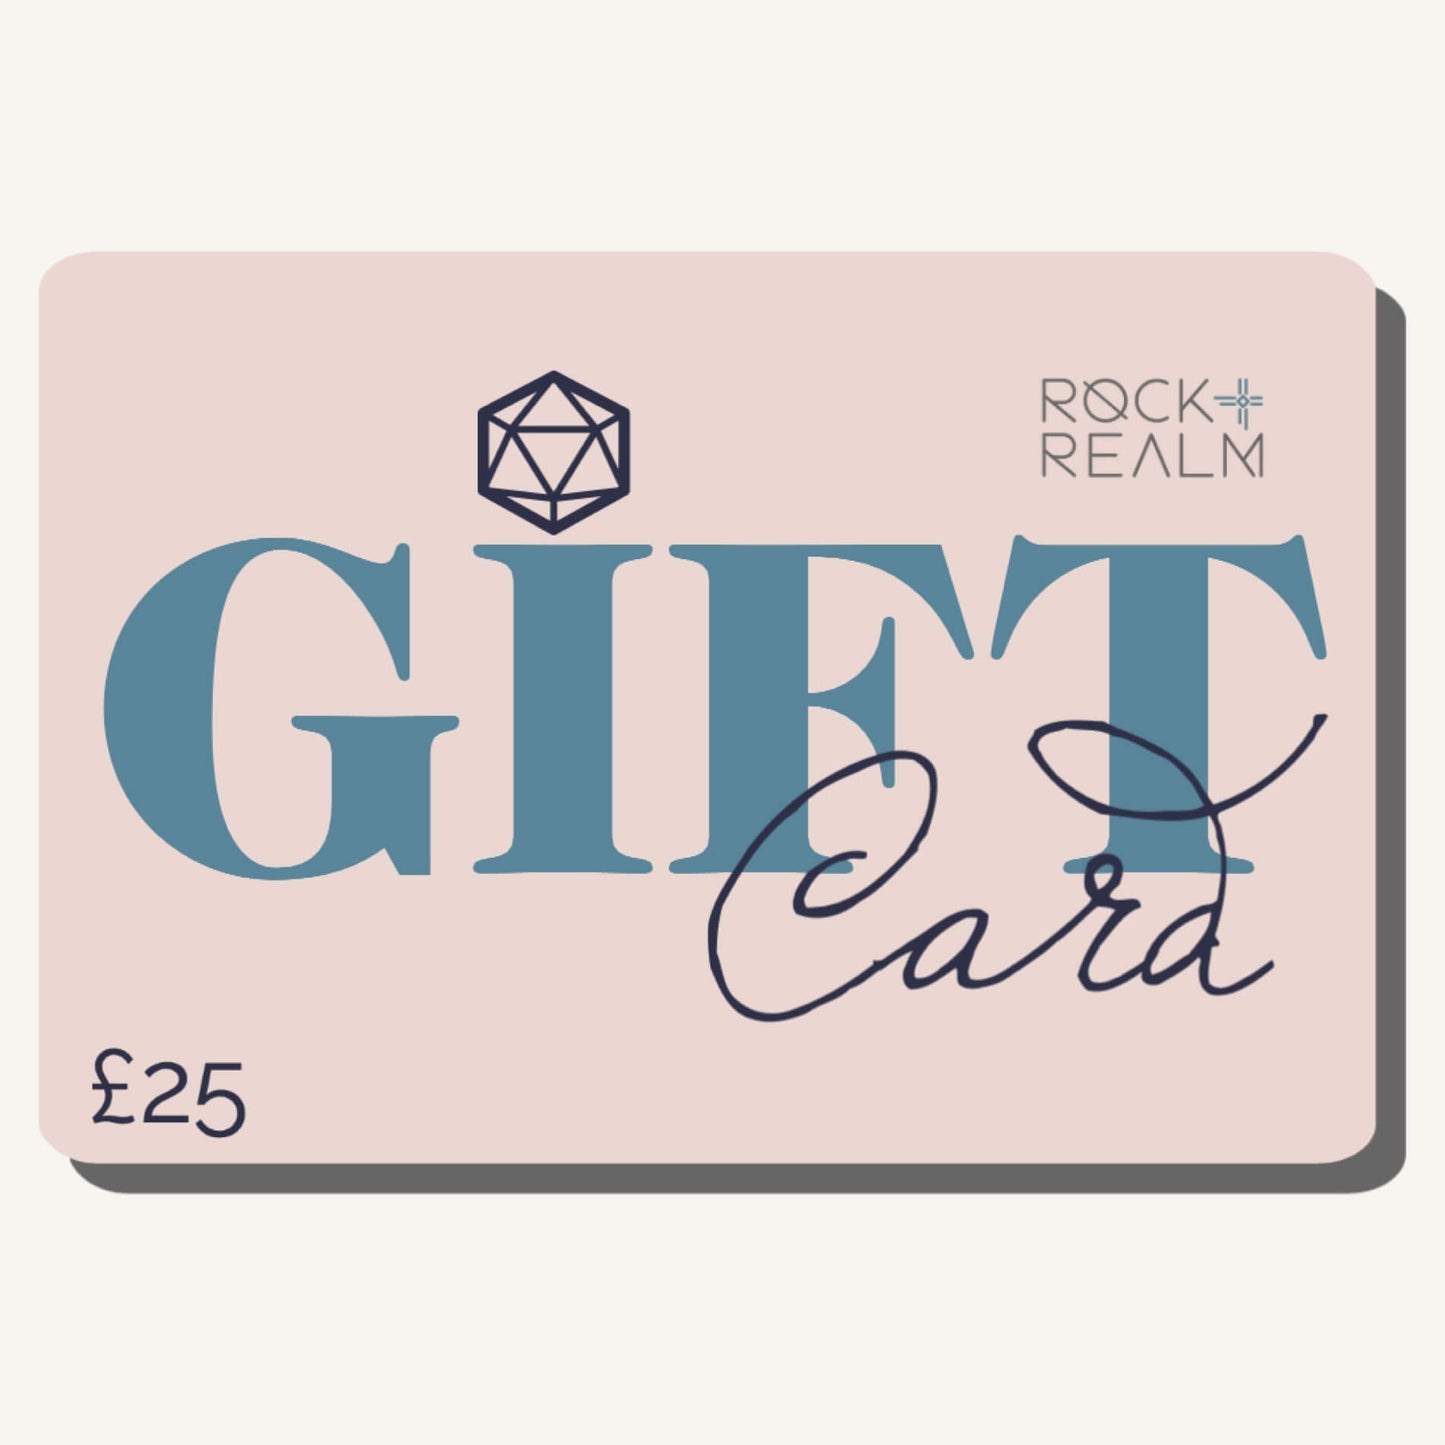 rock and realm £25 gift card picture in pink and blue